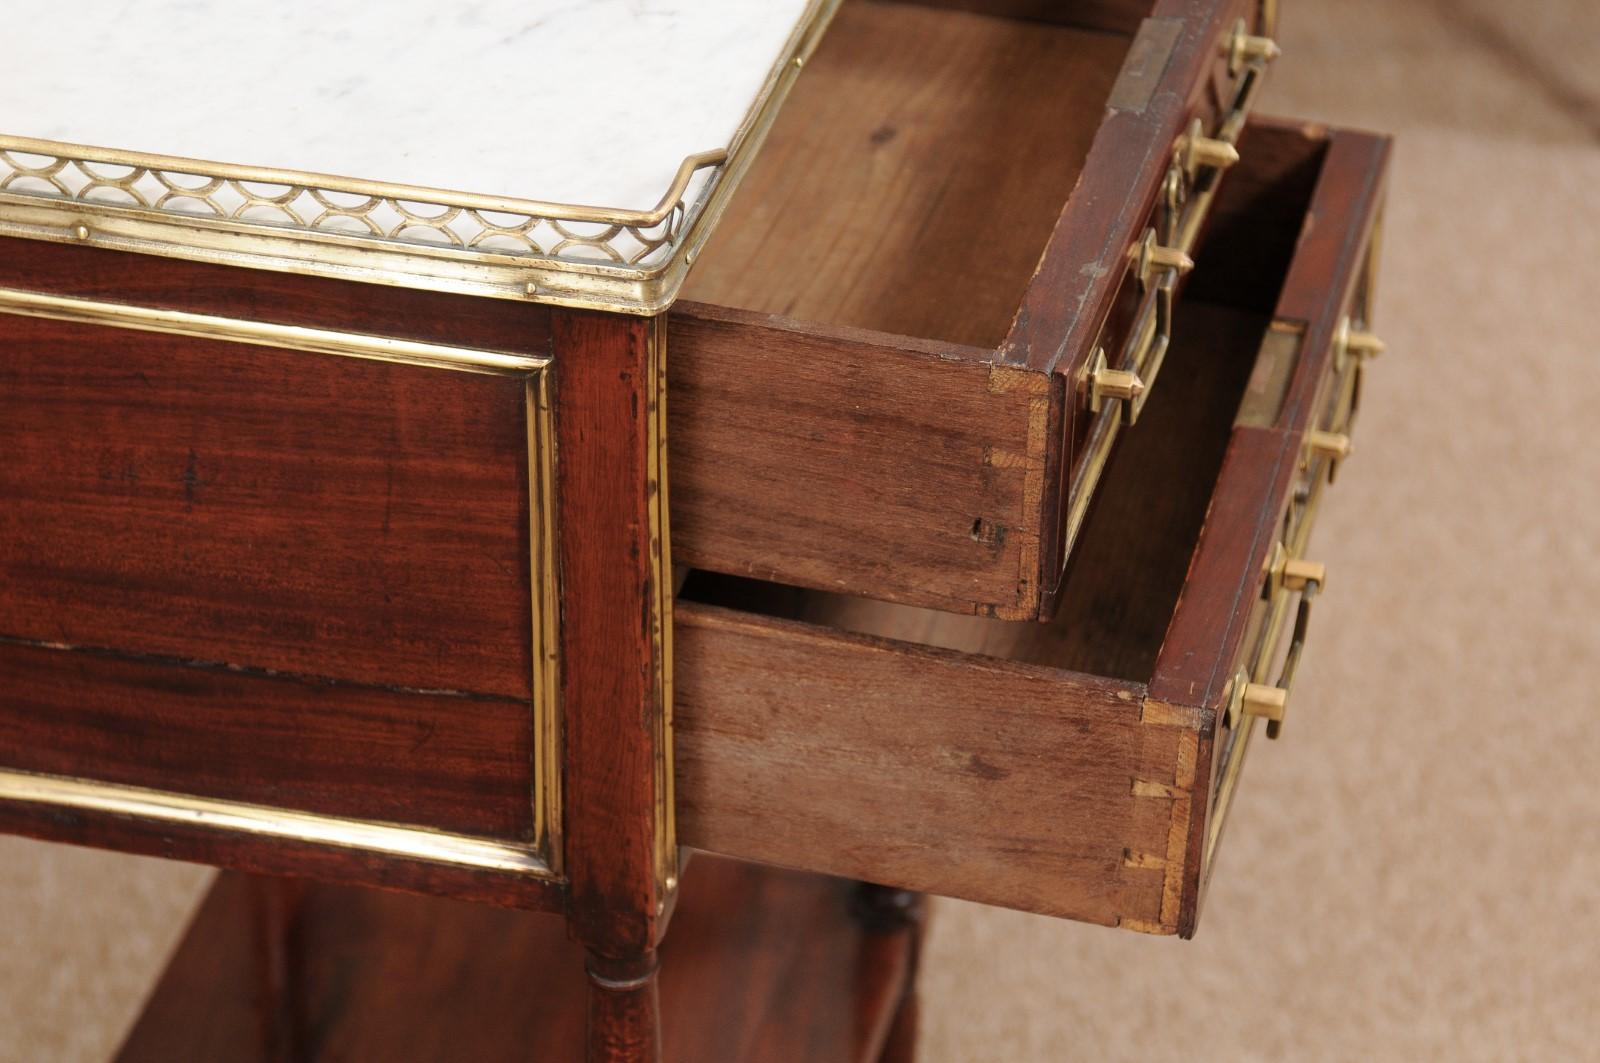 18th Century Louis XVI Walnut Chevet with 2 Drawers, Lower Shelf, and White Marble Top